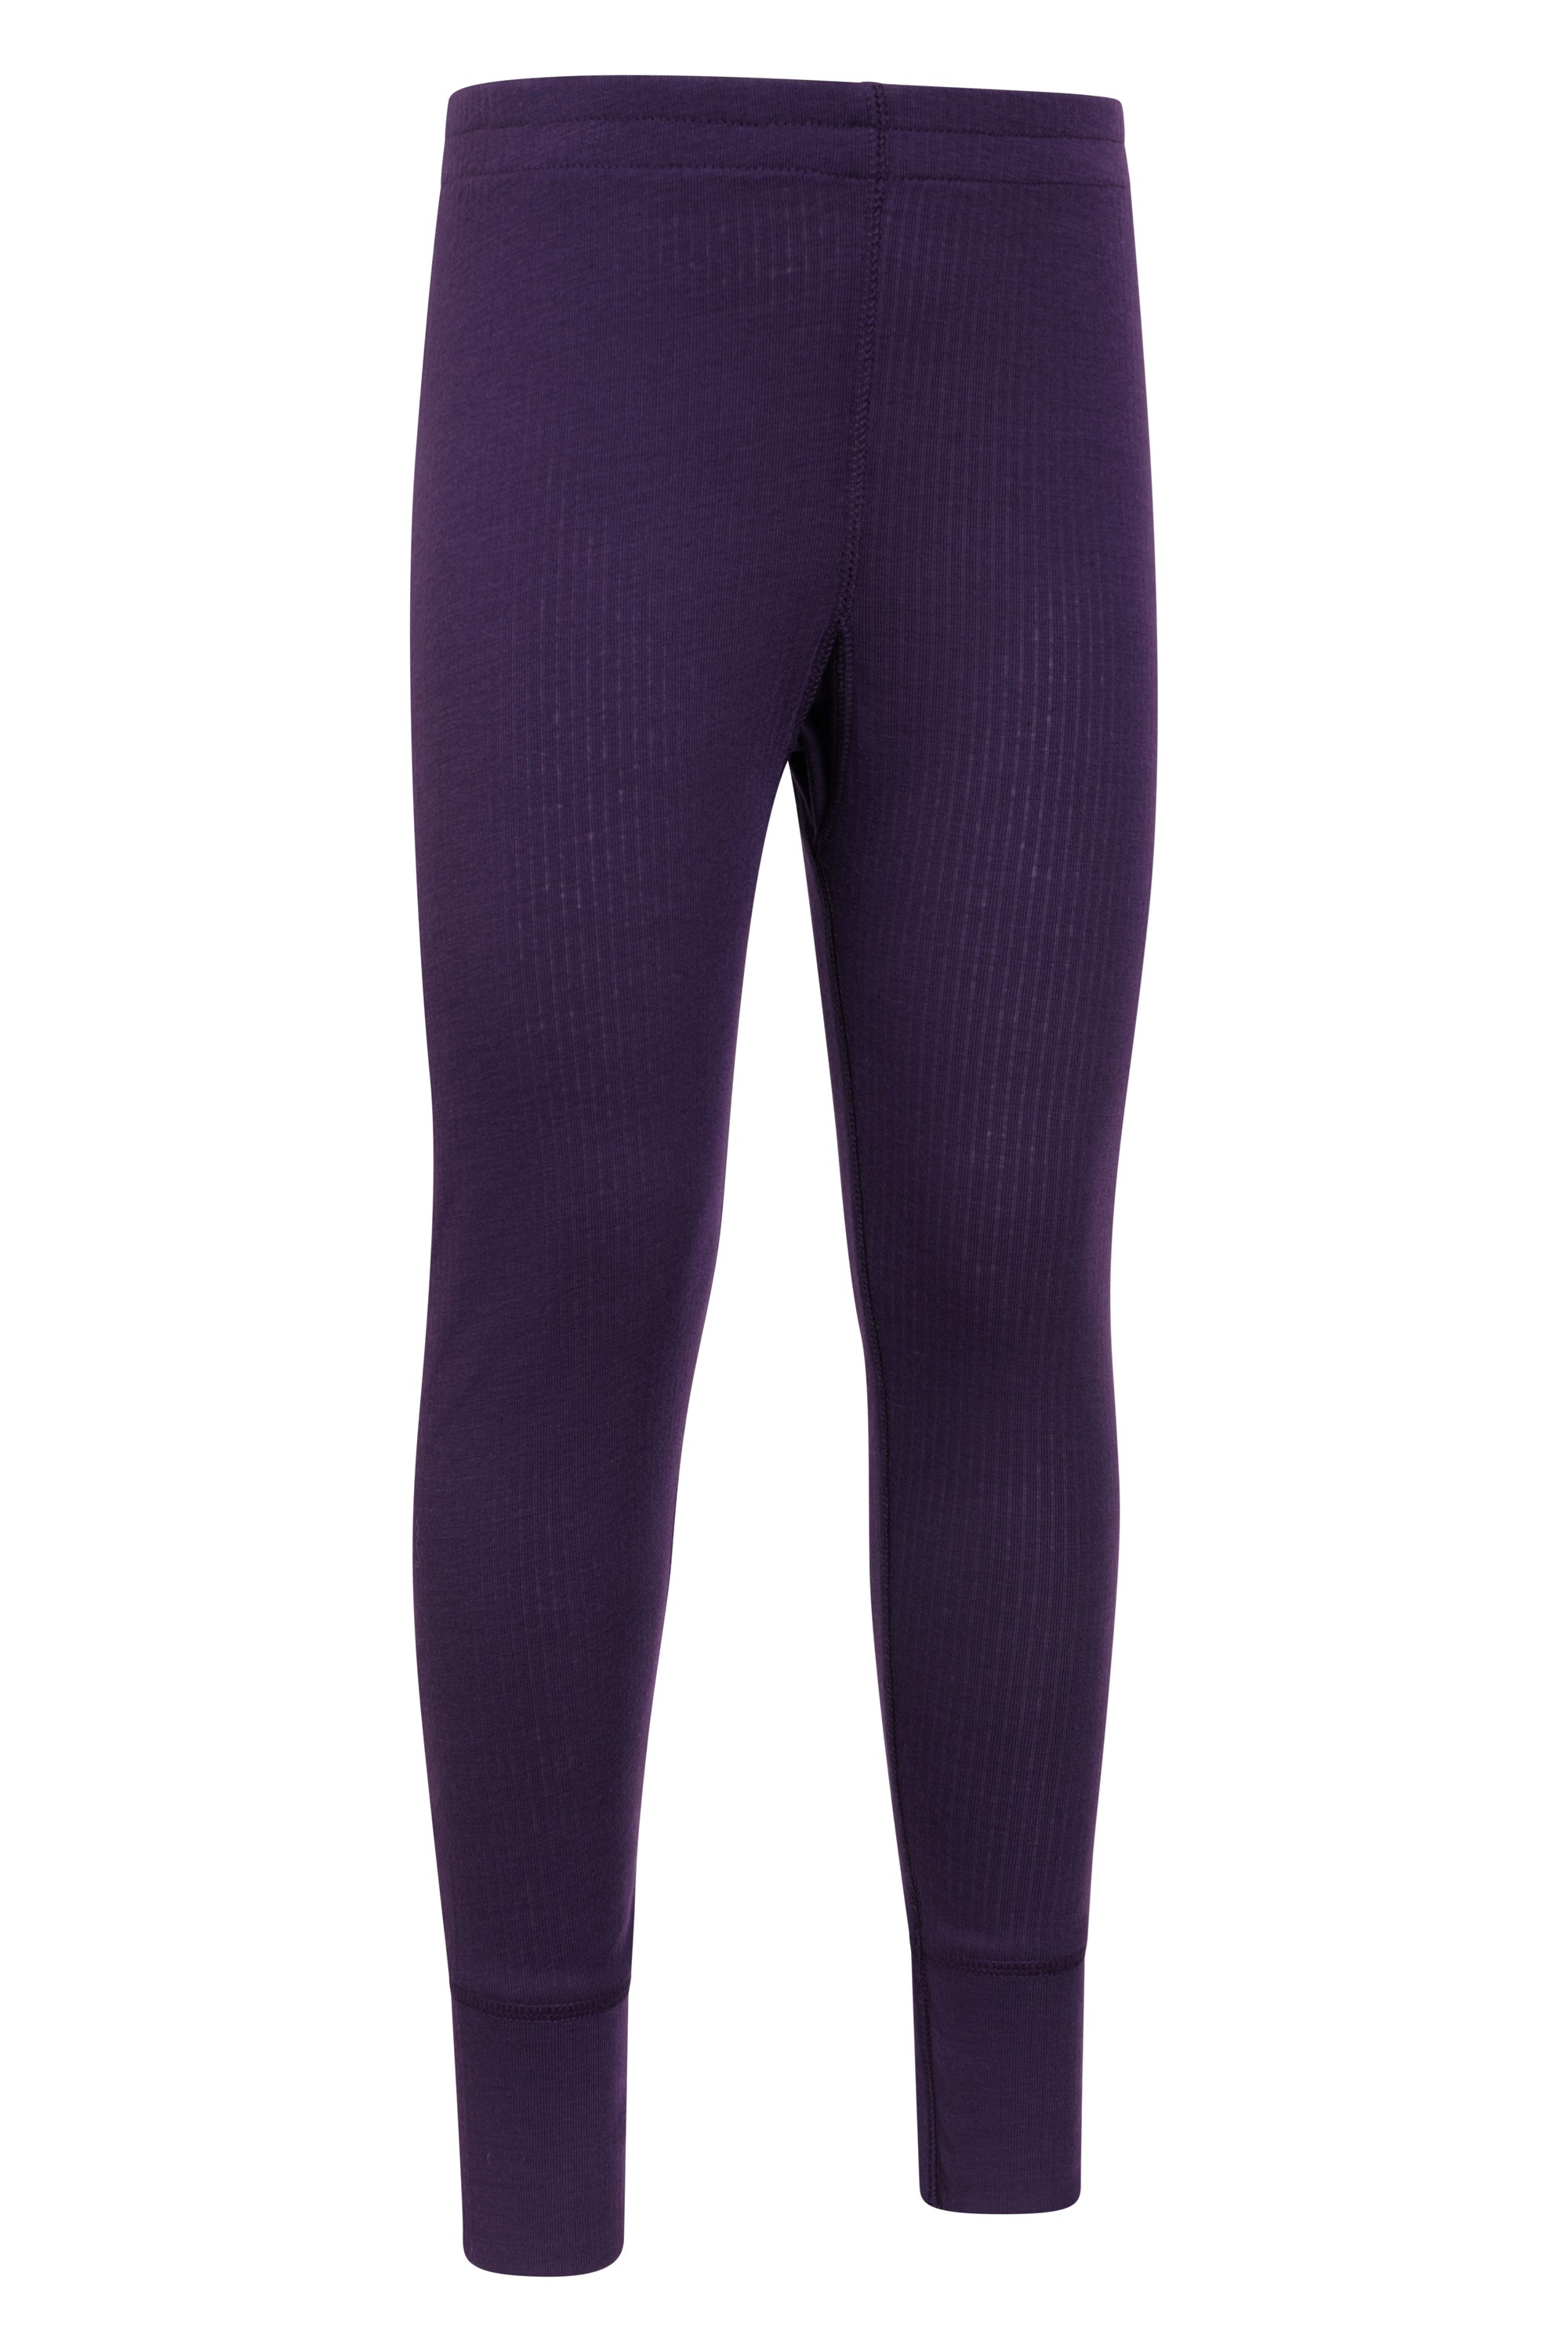 thermabod, thermabods, thermal, thermals, long john, long johns, legging,  leggings, kids, thermals - The Scout Shop